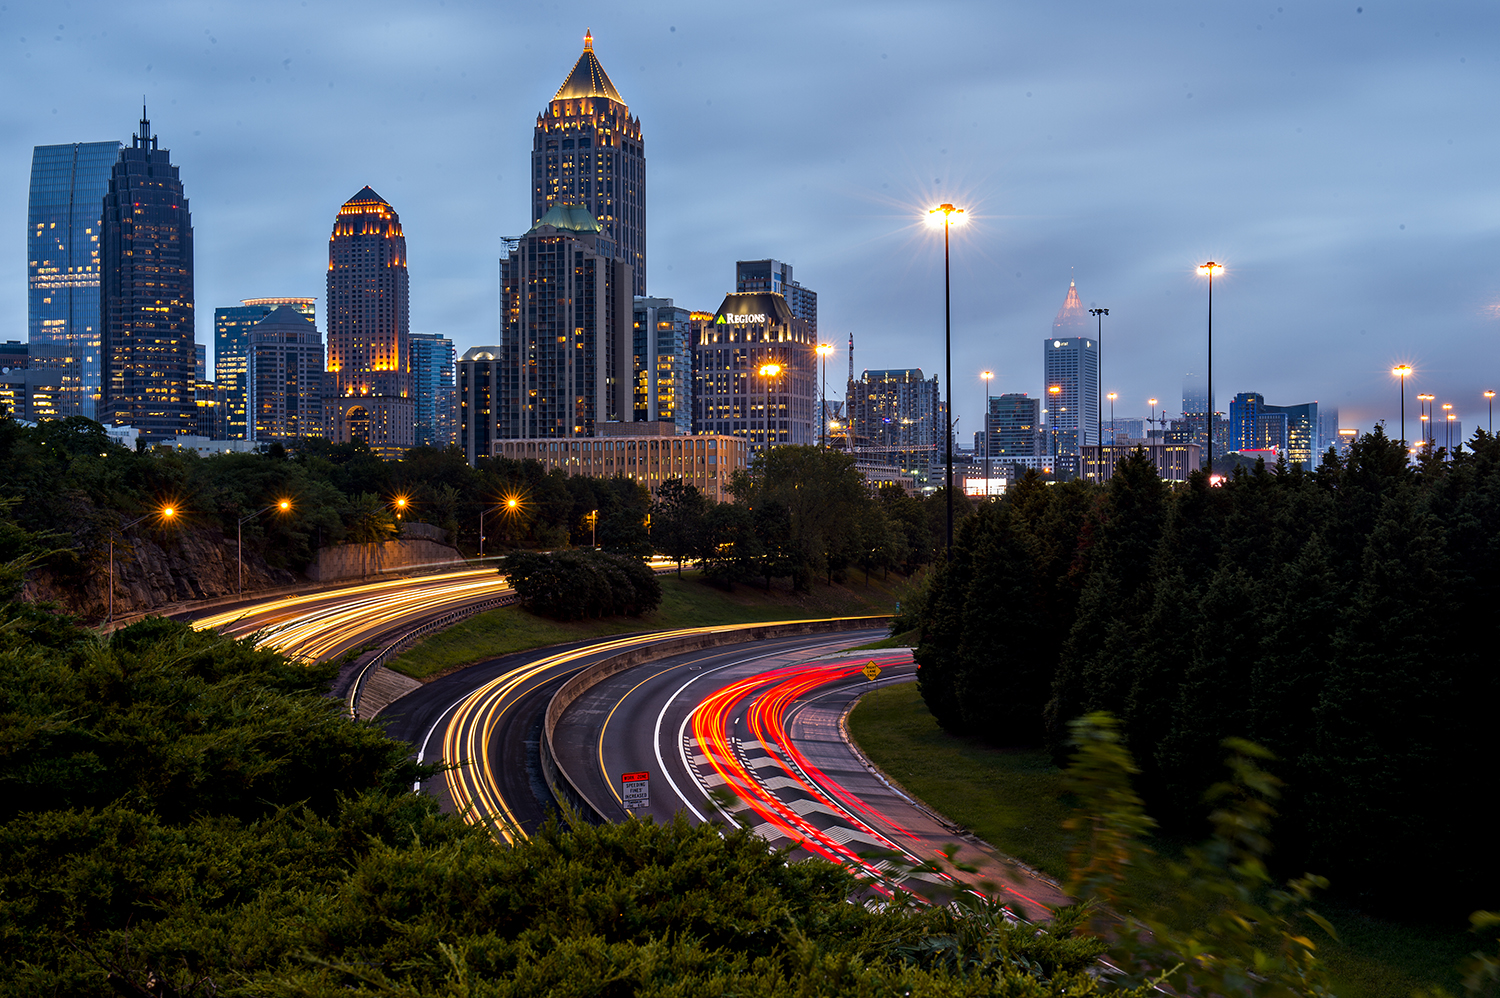 A scene of blurred traffic and many high-rises against a blue sky in Atlanta.